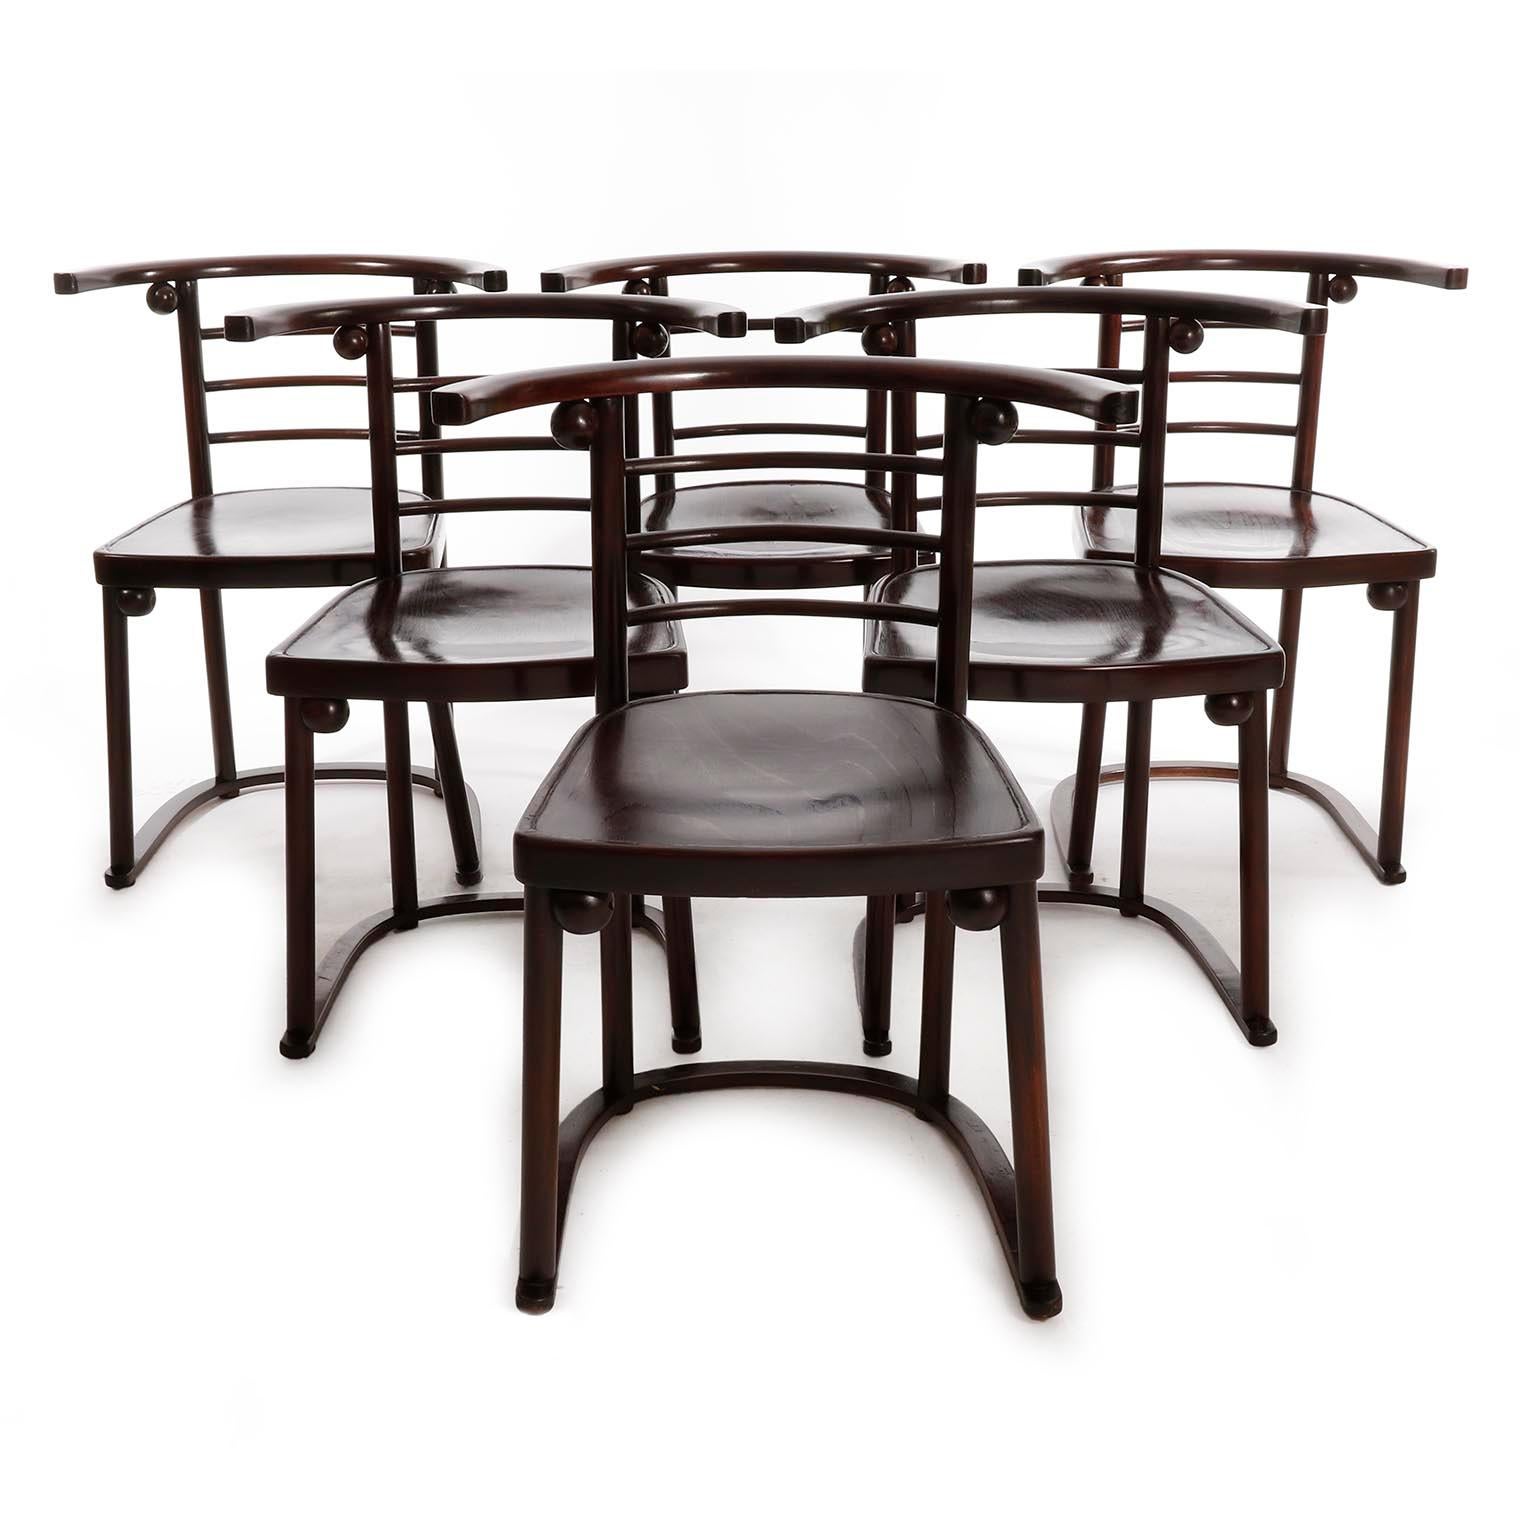 A set of six gorgeous bentwood dining room chairs designed by Josef Hoffmann for the famous Viennesse Cabaret Fledermaus in 1907.
The chairs were manufactured by Josef and Jacob Kohn. They are labeled on the underside of the seats with J.&J. Kohn,